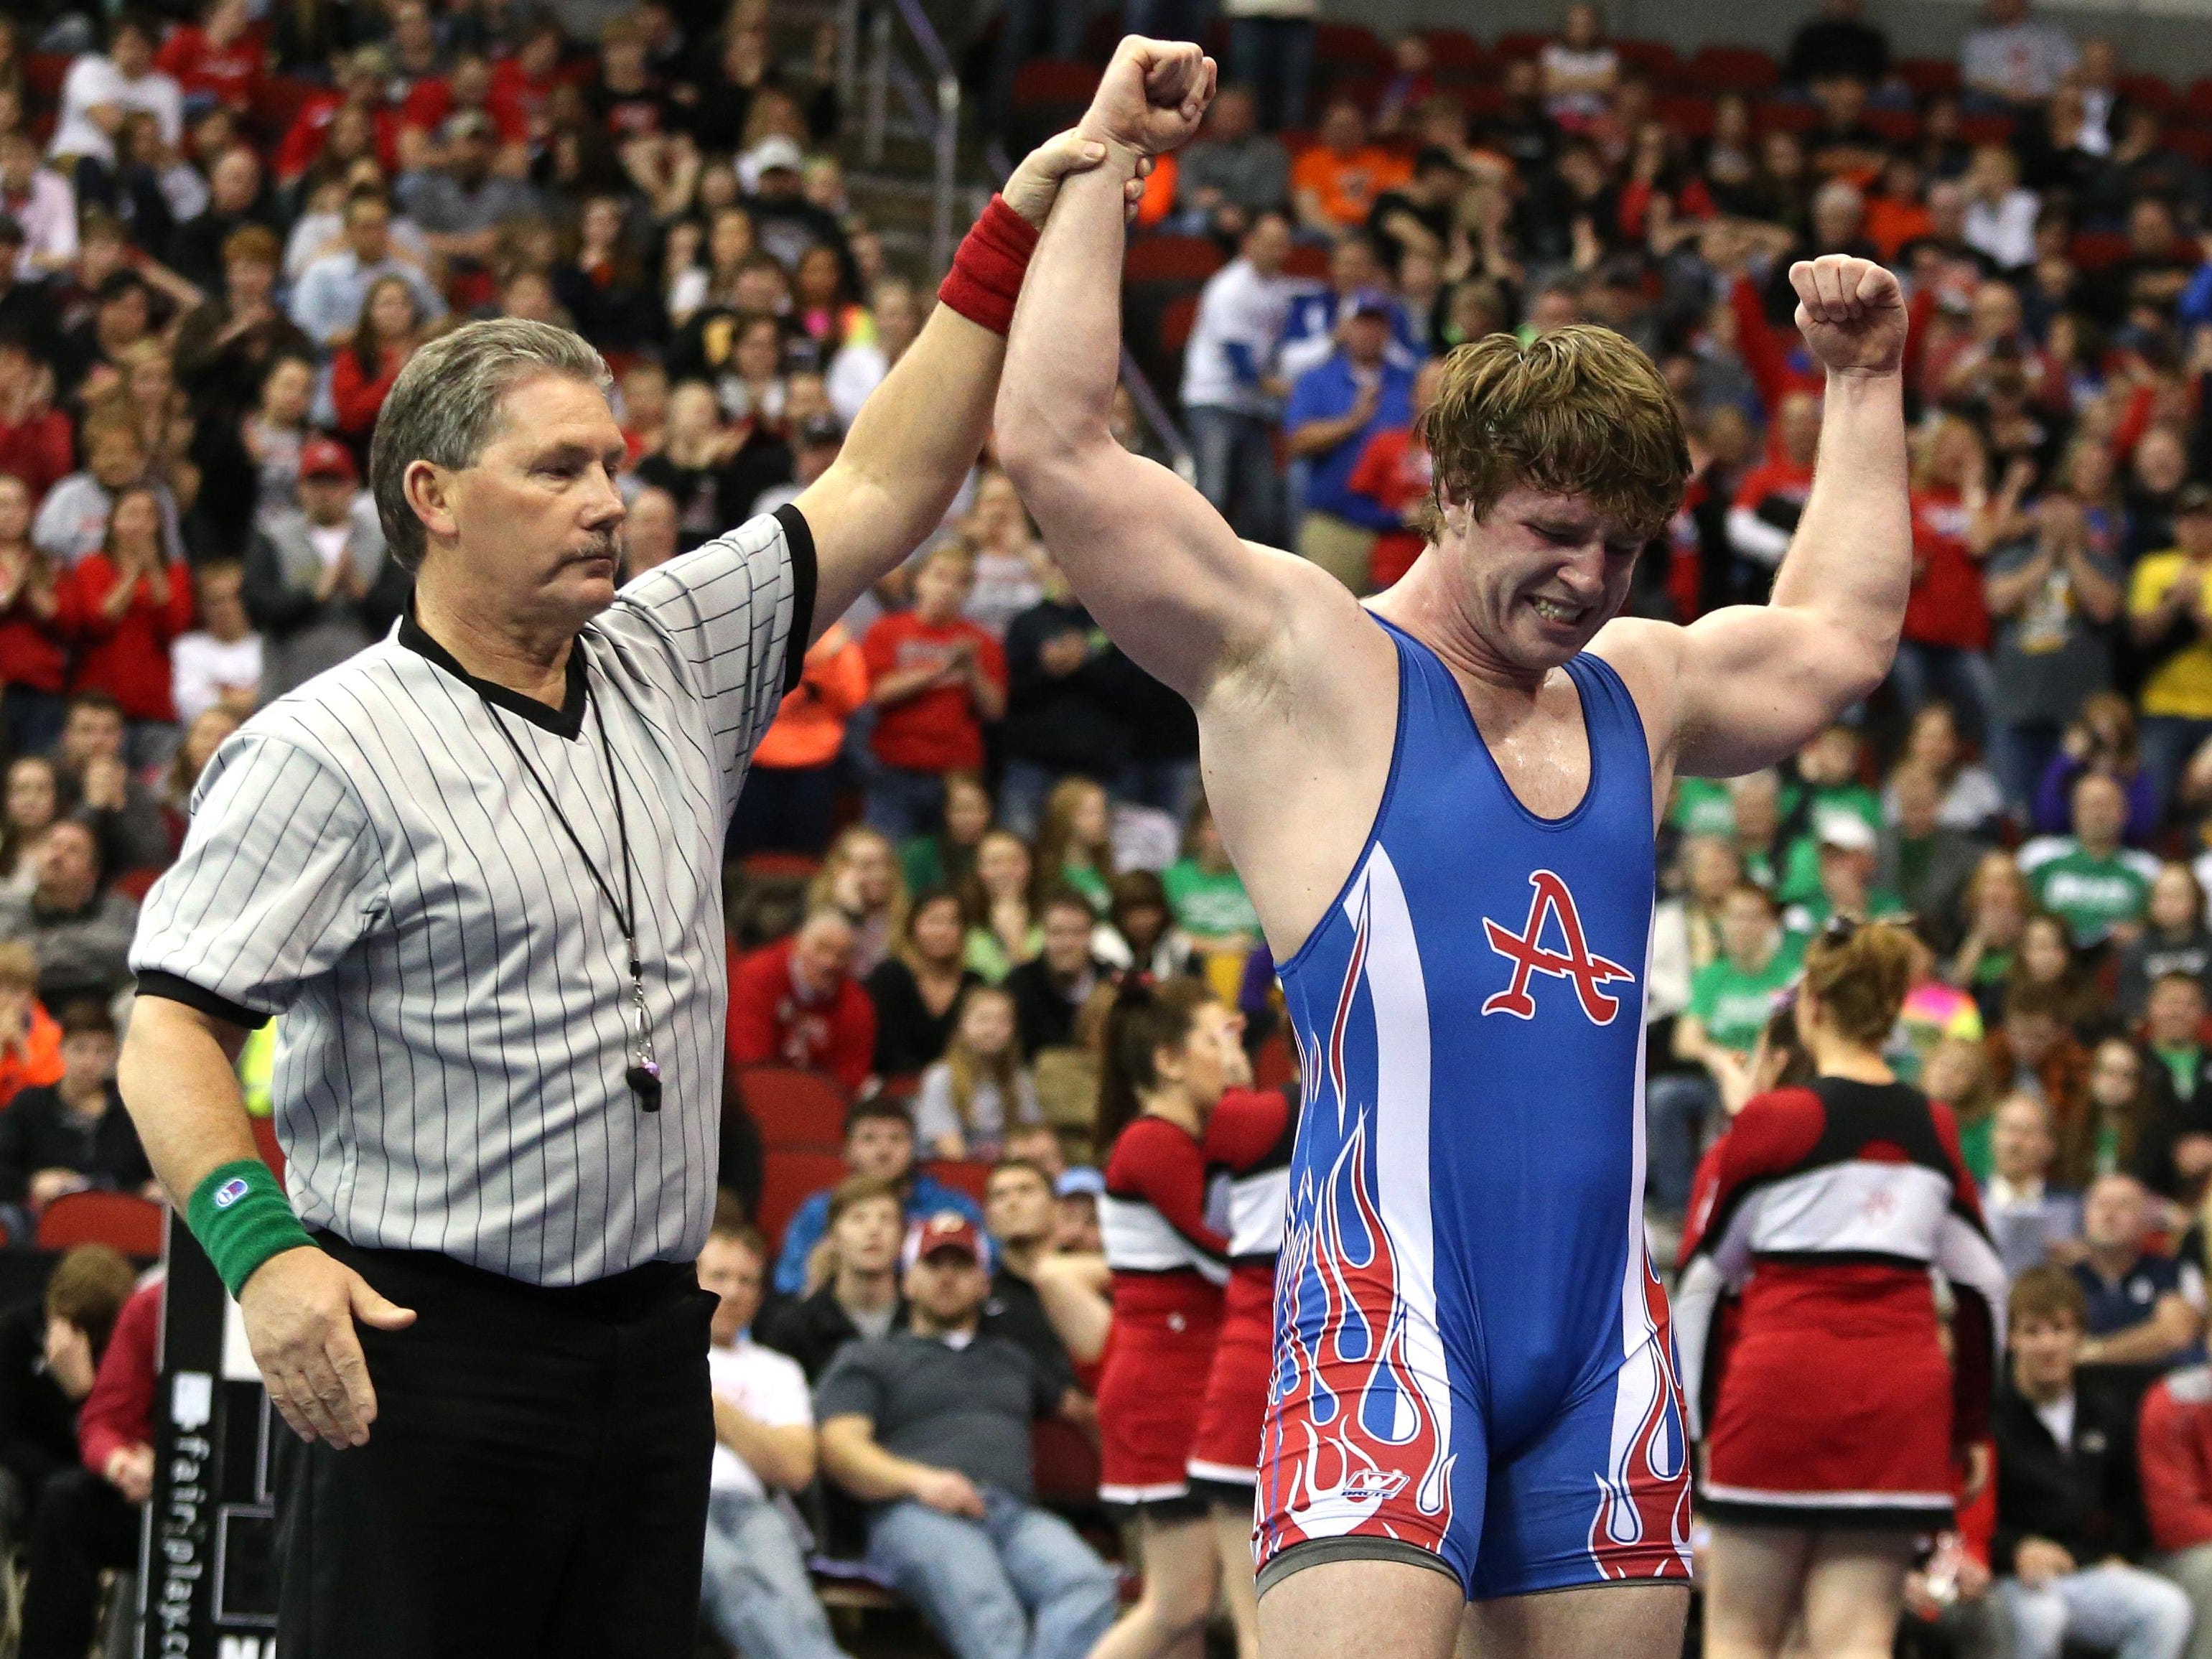 Albia junior Carter Isley celebrates after he won the title at 220 pounds in Class 2A over Hampton-Dumont senior Kendrick Suntken on Saturday, Feb. 21, 2015, during the 2015 Iowa state wrestling championships at Wells Fargo Arena in Des Moines, Iowa.